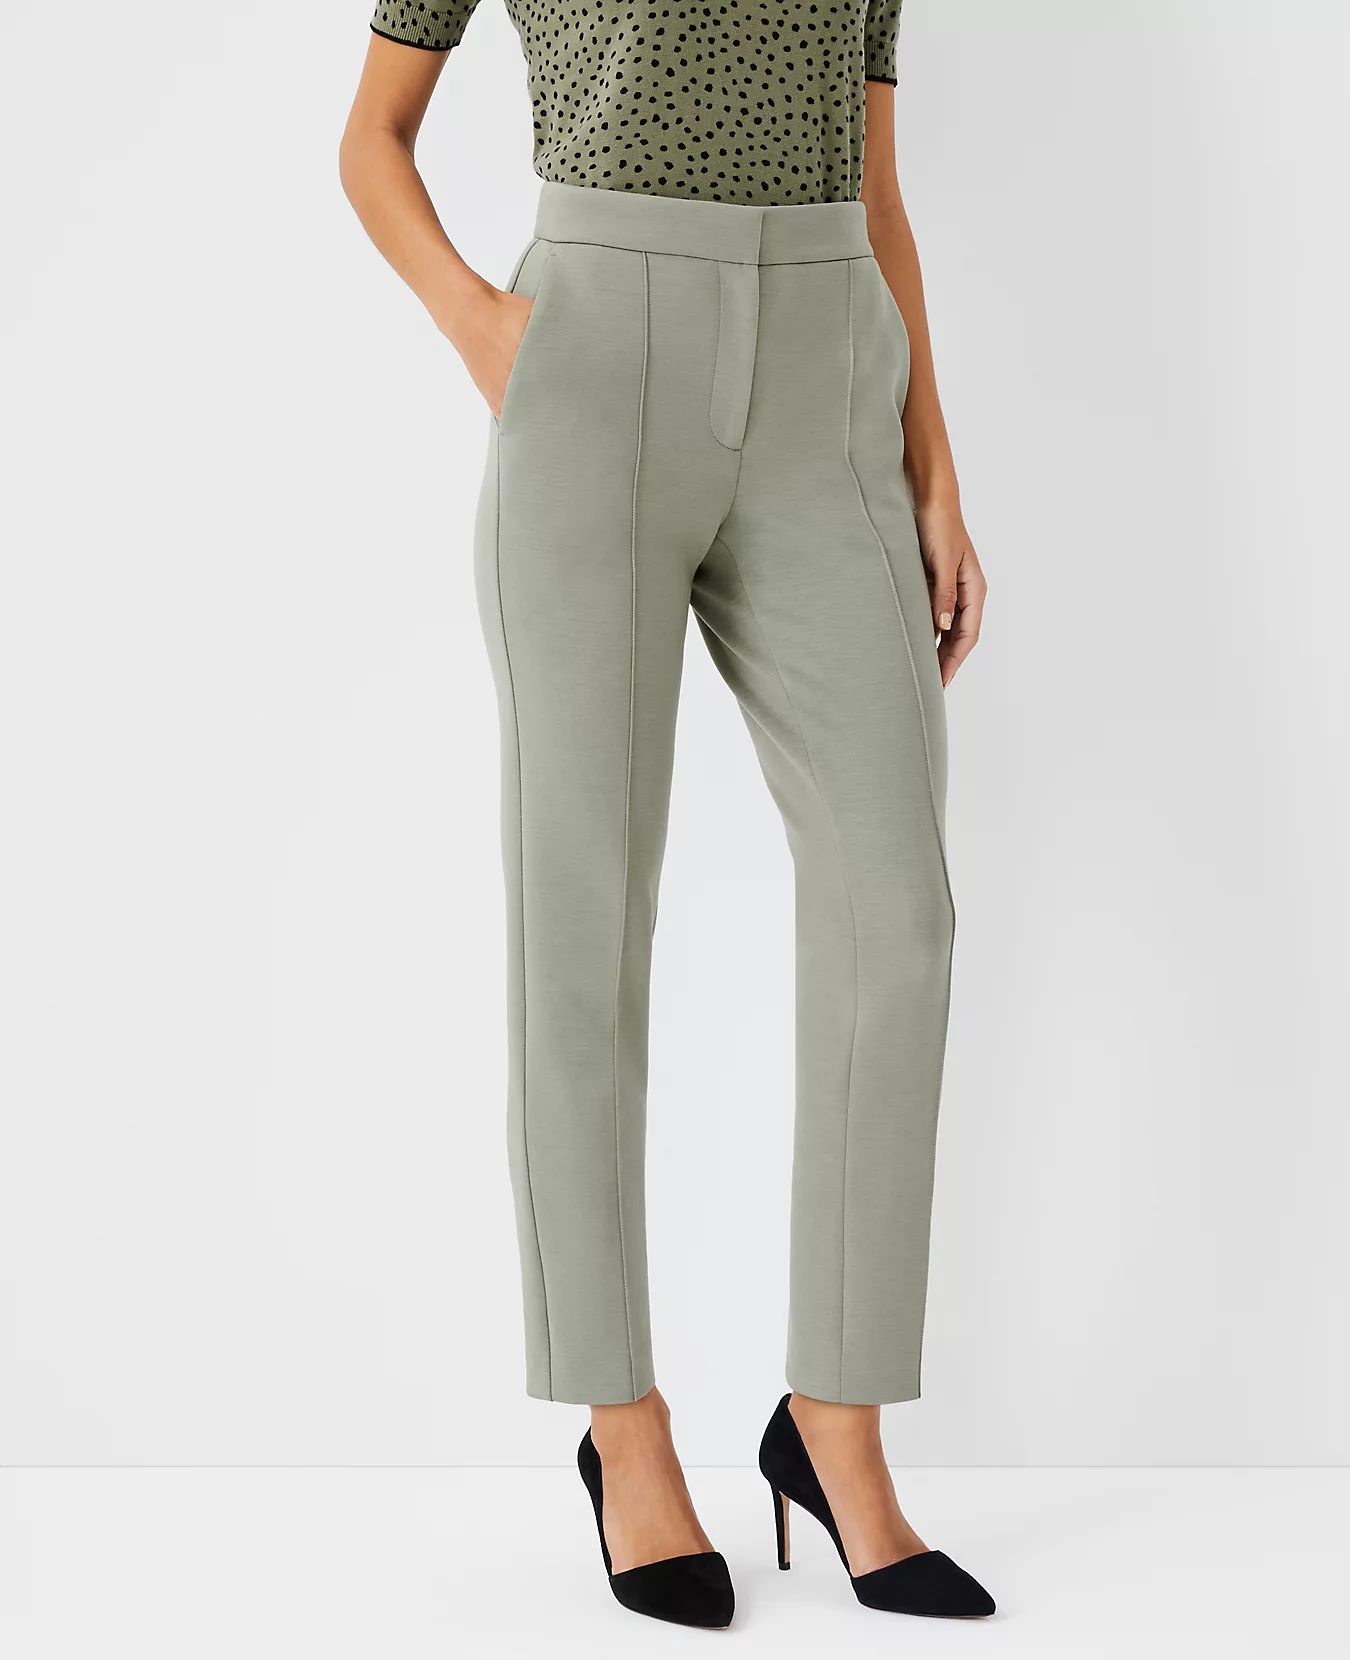 The Petite High Rise Ankle Pant in Double Knit | Ann Taylor | Ann Taylor (US)